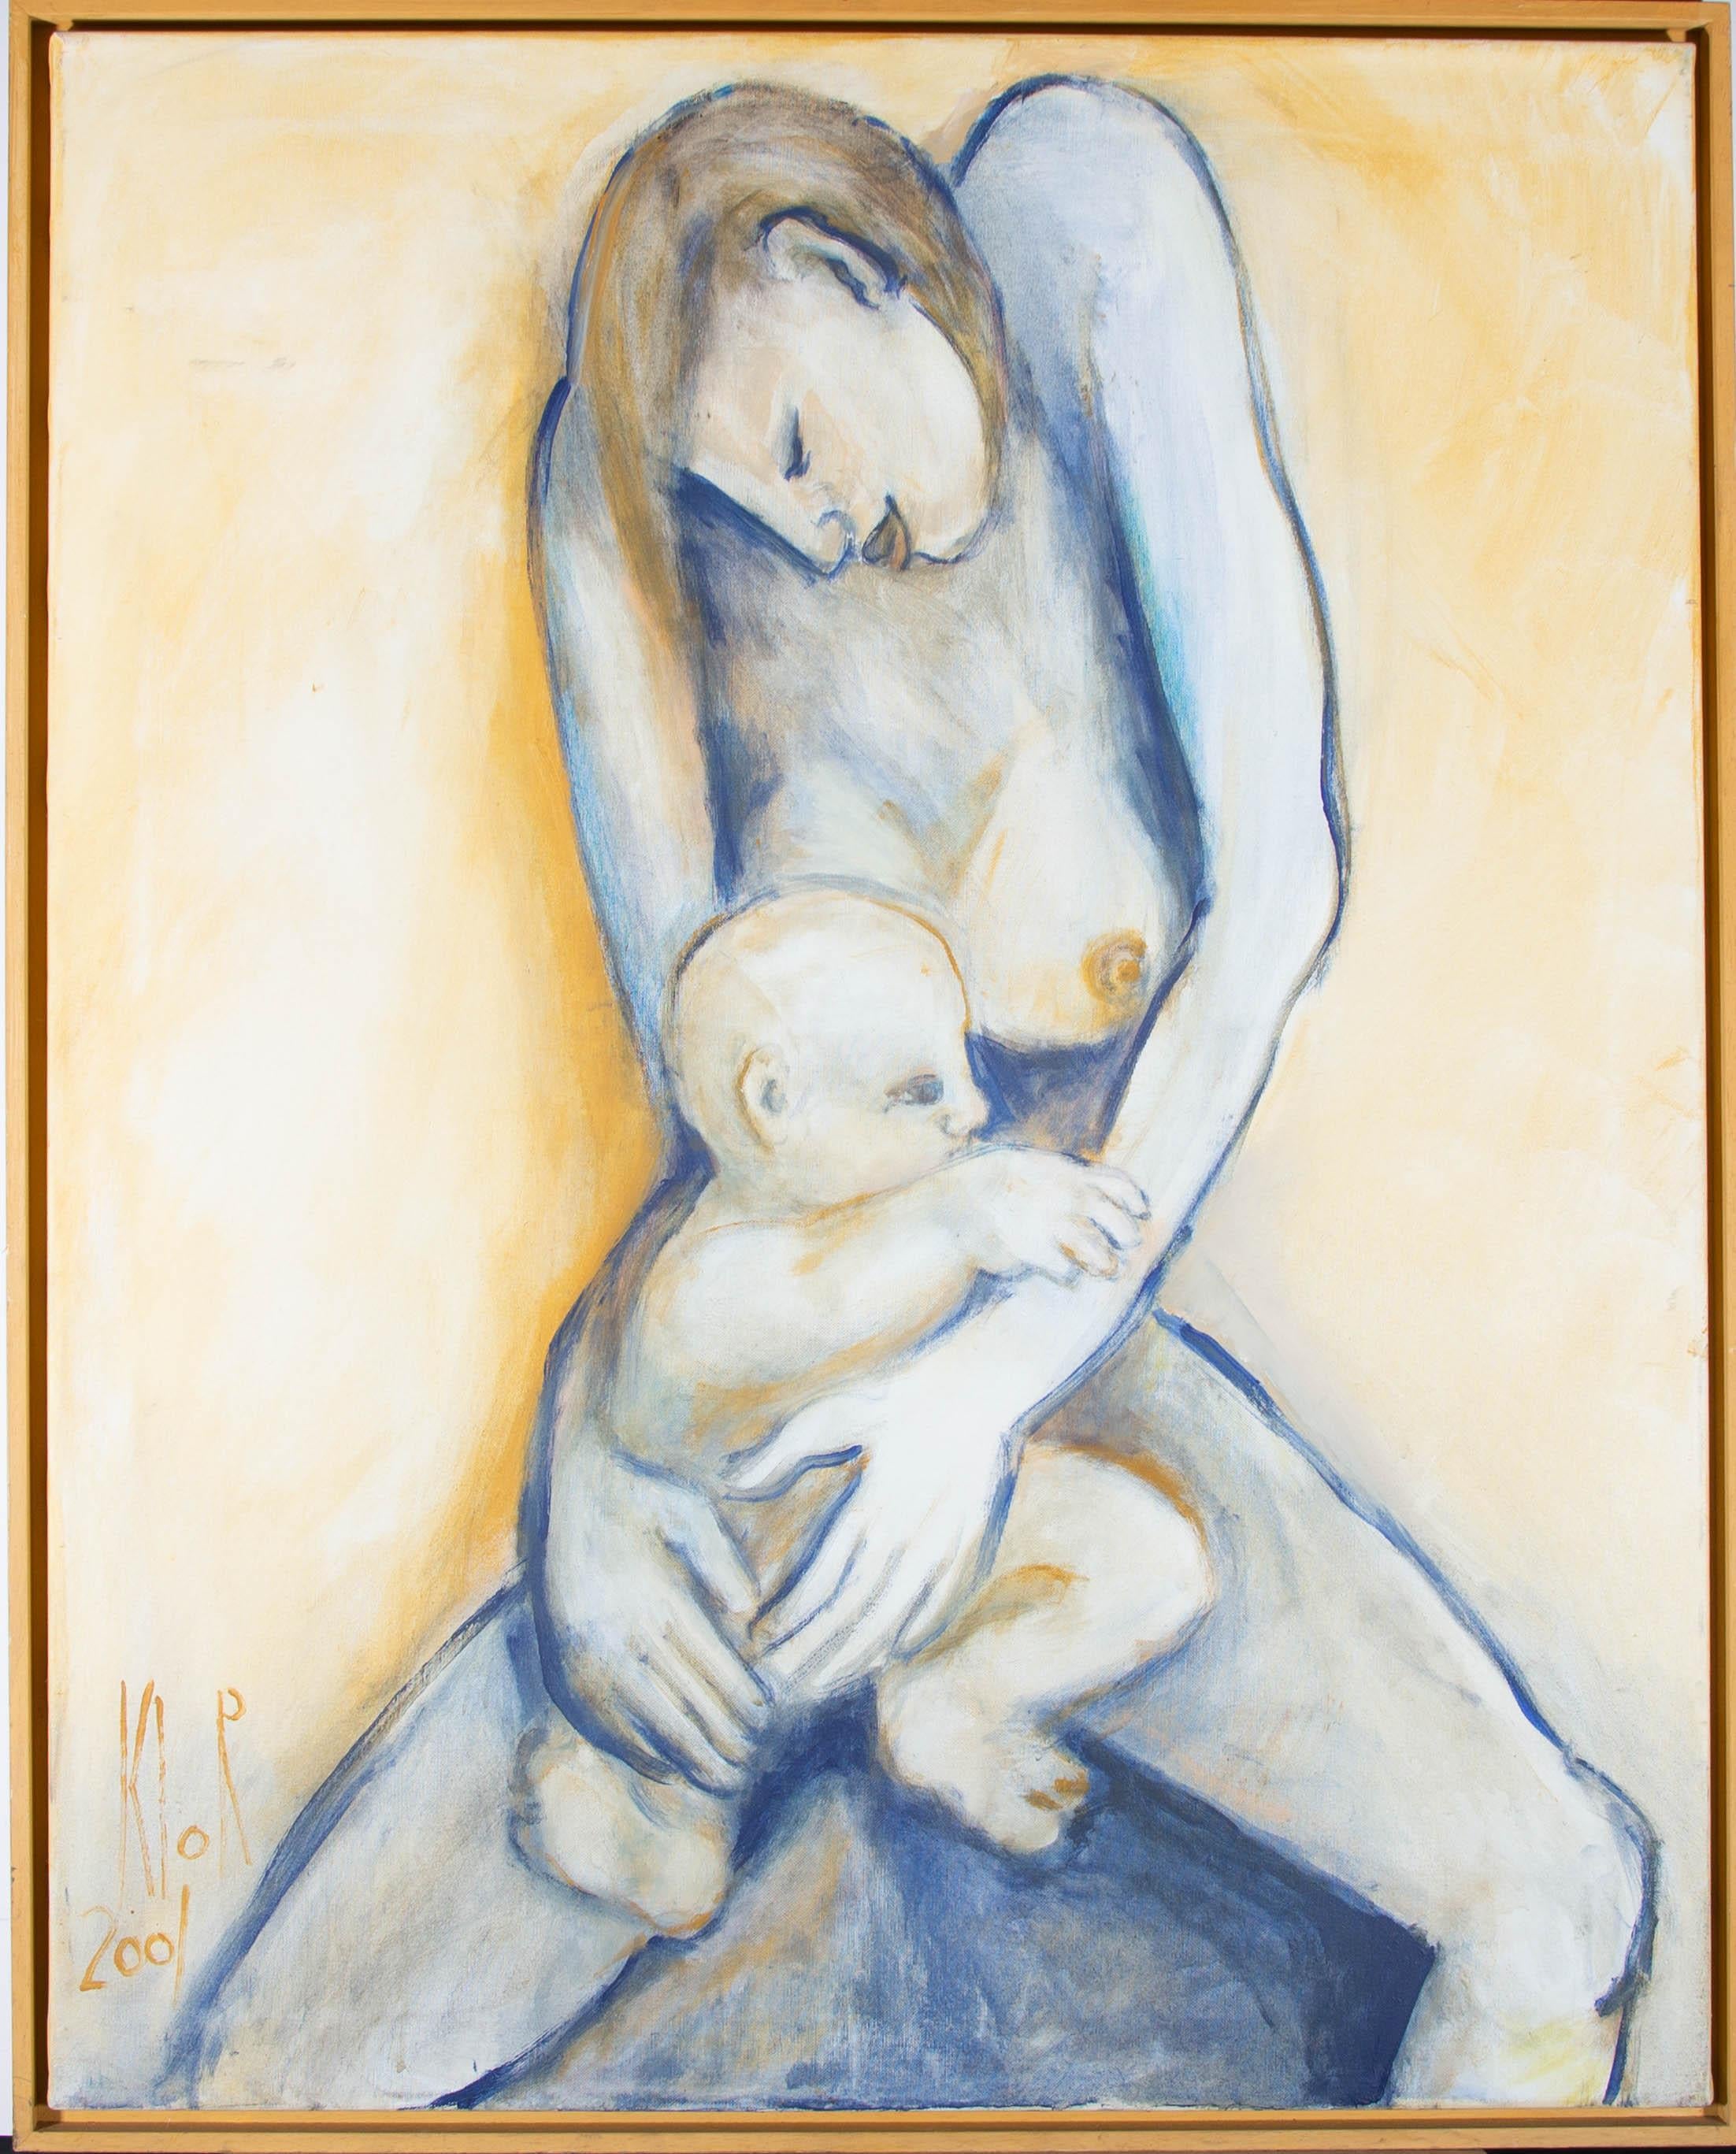 A beautiful contemporary depiction of the bond between a mother and her baby. The artist has captured the intimacy between their bodies and the mother's expression of joy and love in wonderfully soft and expressive blue line work. The artist has